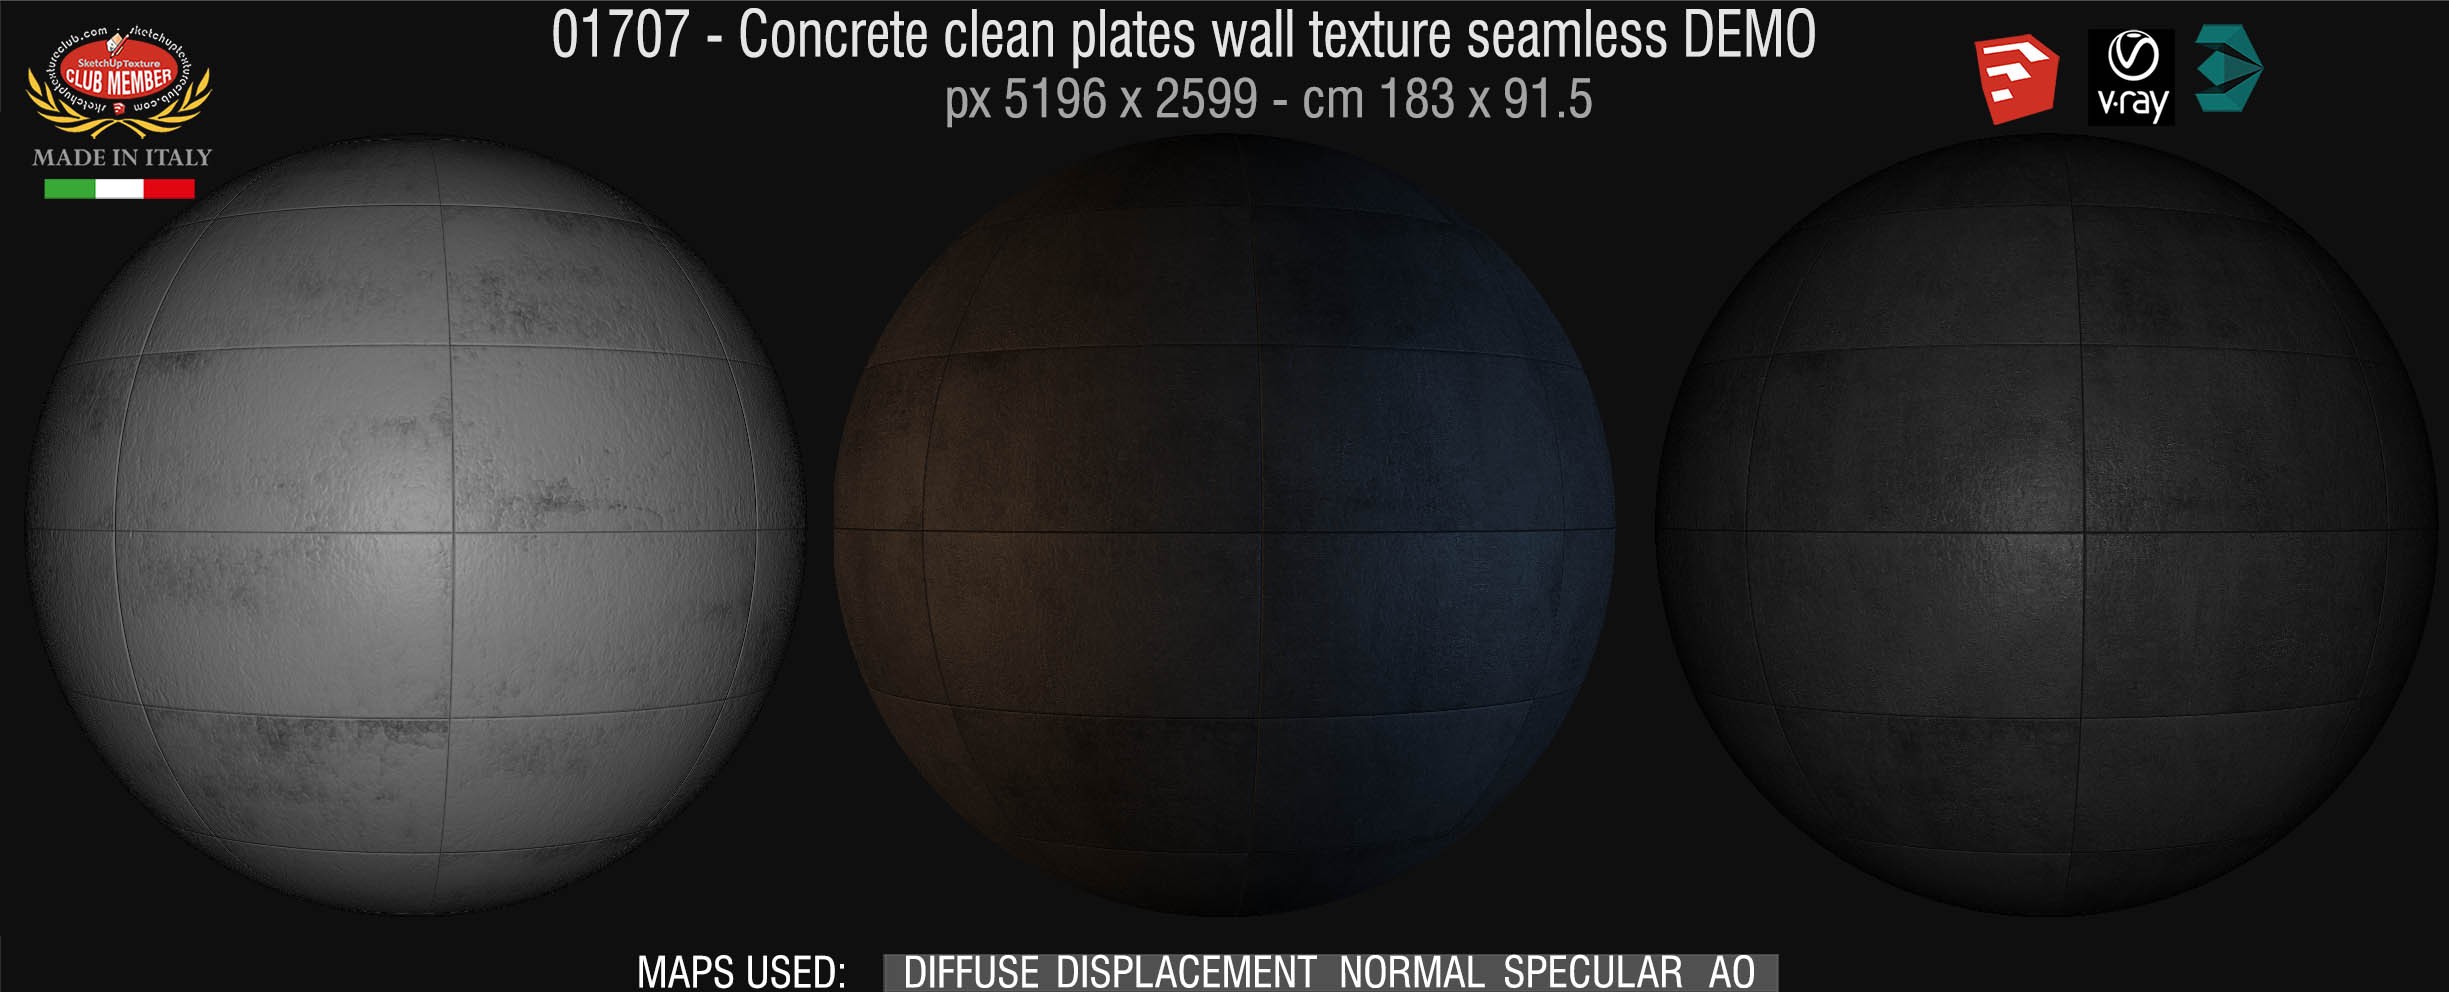 01707 Concrete clean plates wall texture seamless + maps DEMO